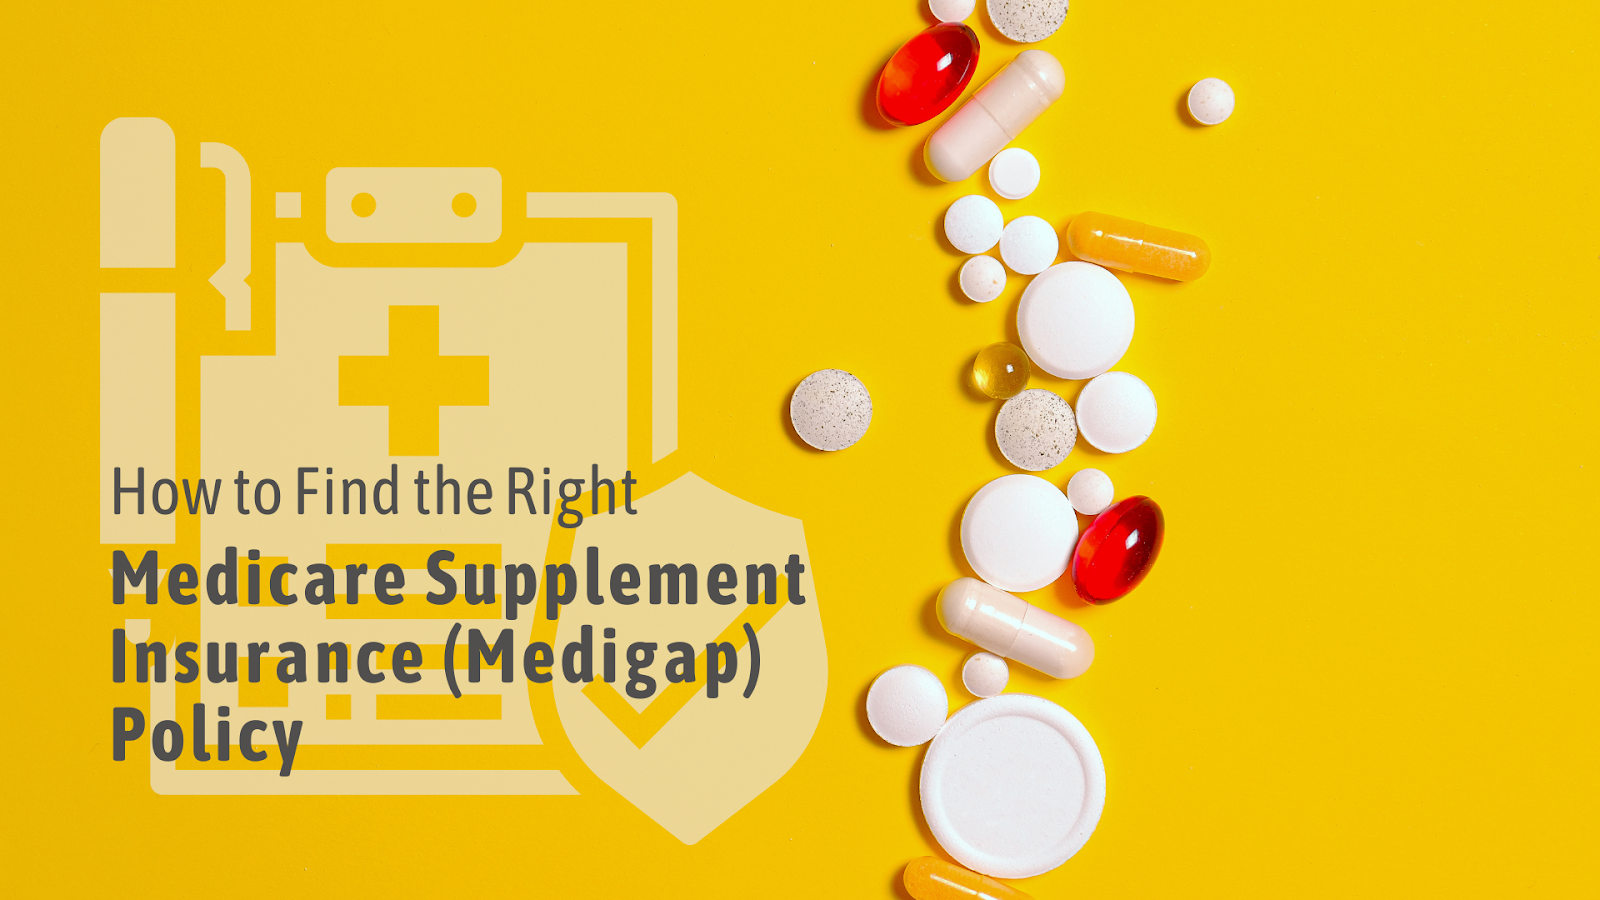 Right Medicare Supplement Insurance Policy